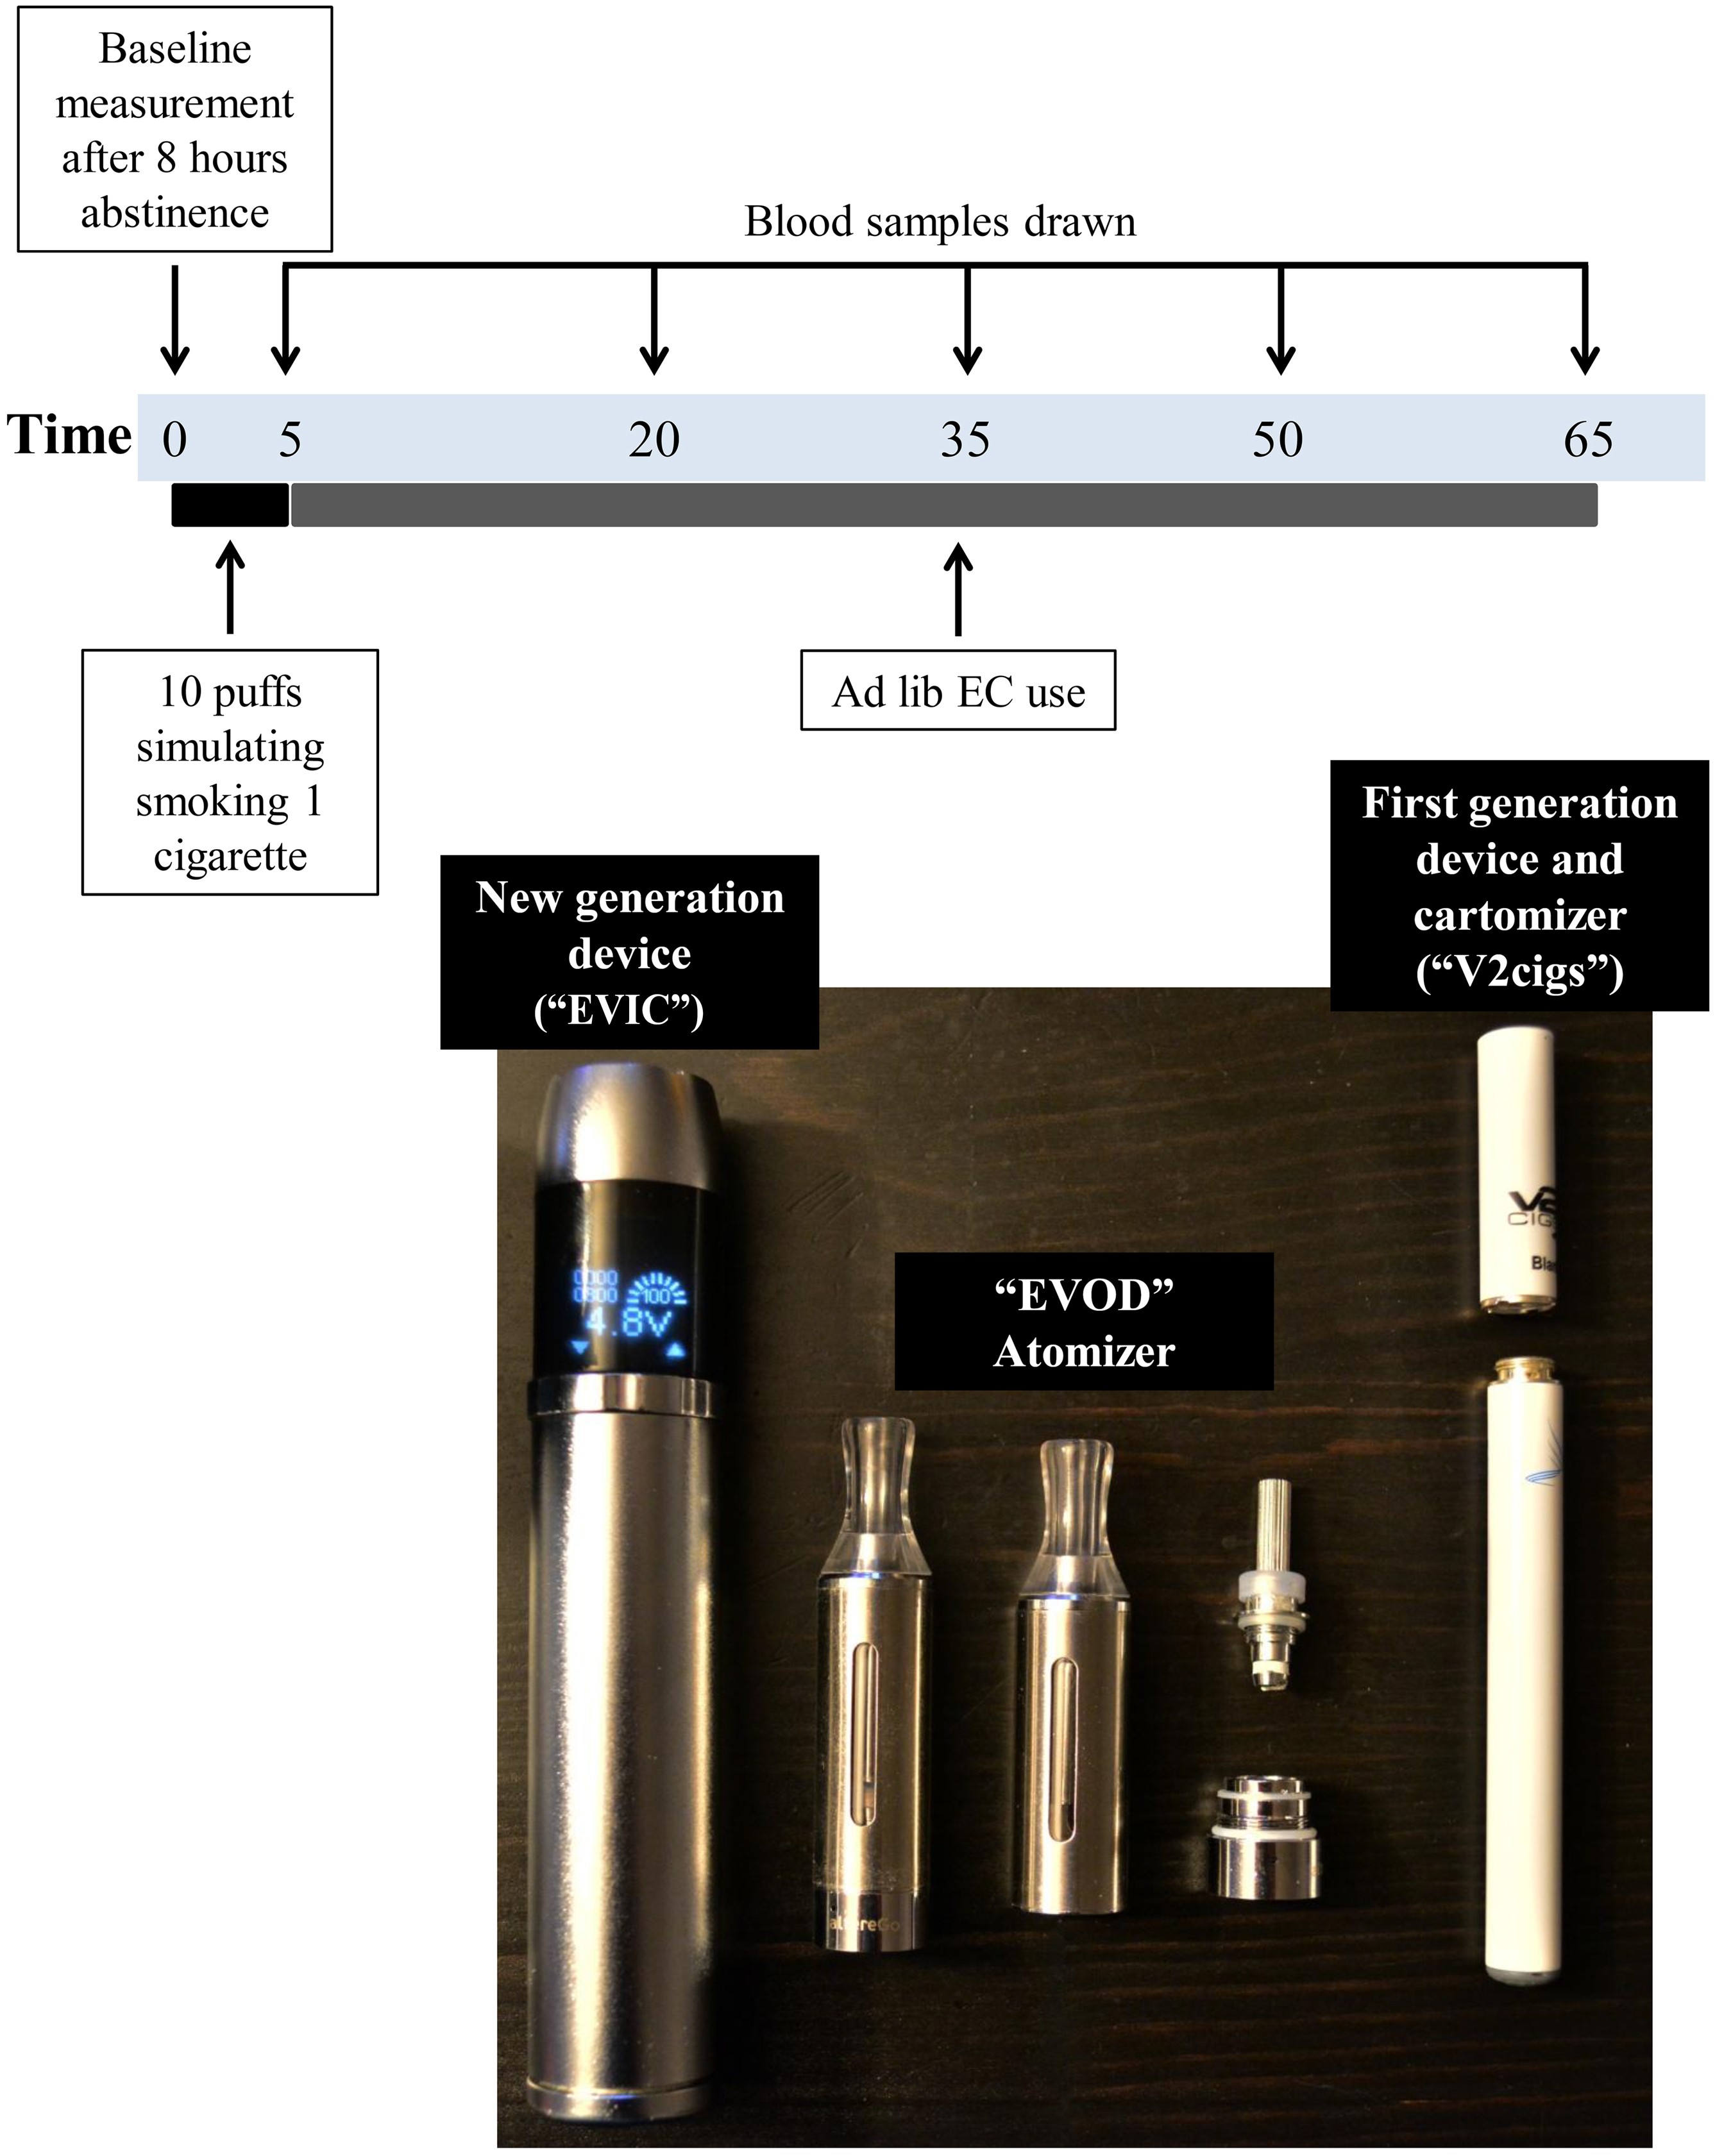 Nicotine absorption from electronic cigarette use: comparison ...